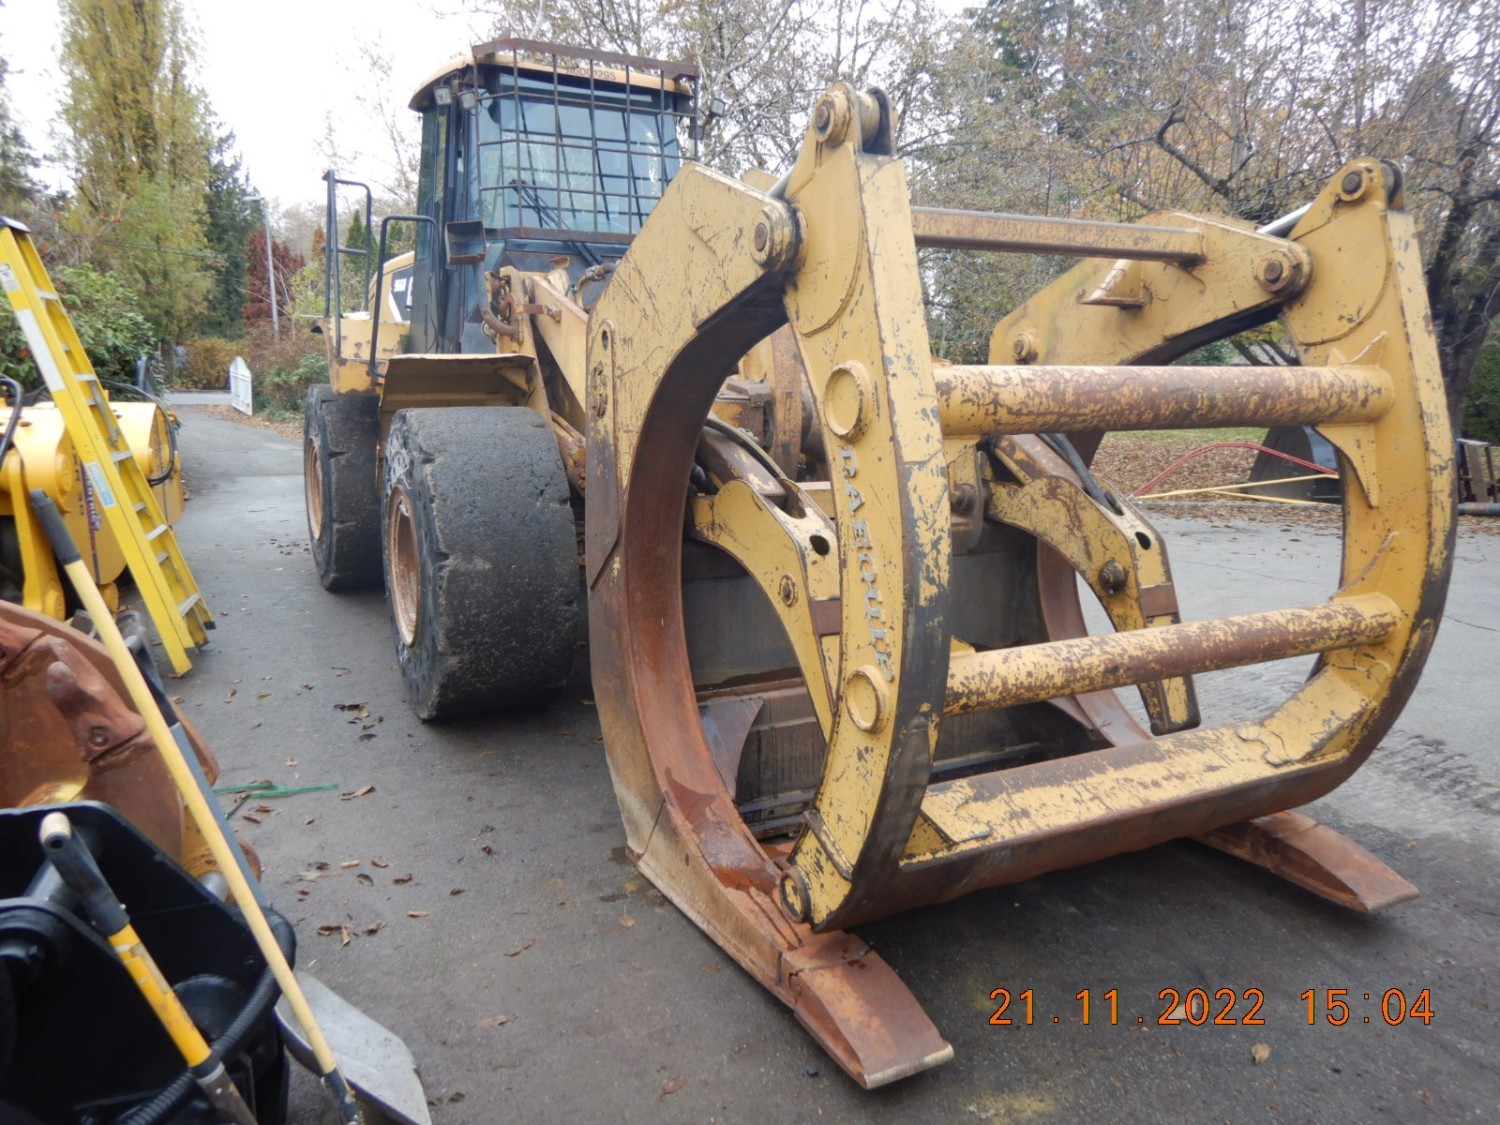 sold-2010-cat-966h-cw-custom-daequip-dual-log-or-pipe-grapple-with-internal-grapple-to-keep-pipe-logs-poles-secure-big-13